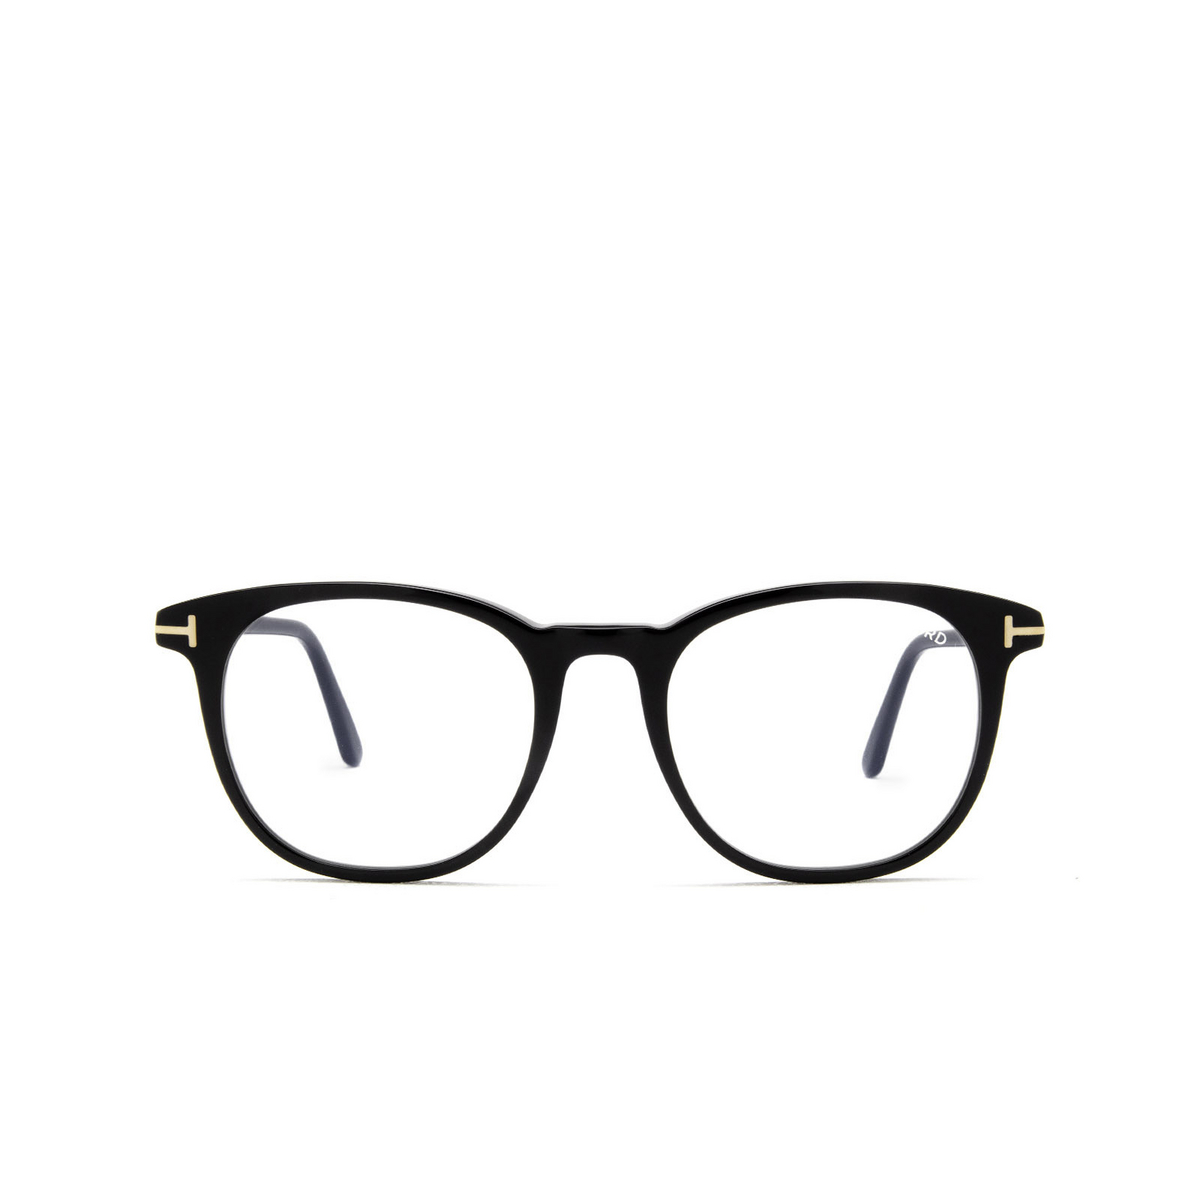 Tom Ford® Round Eyeglasses: FT5754-B color Black 001 - front view.